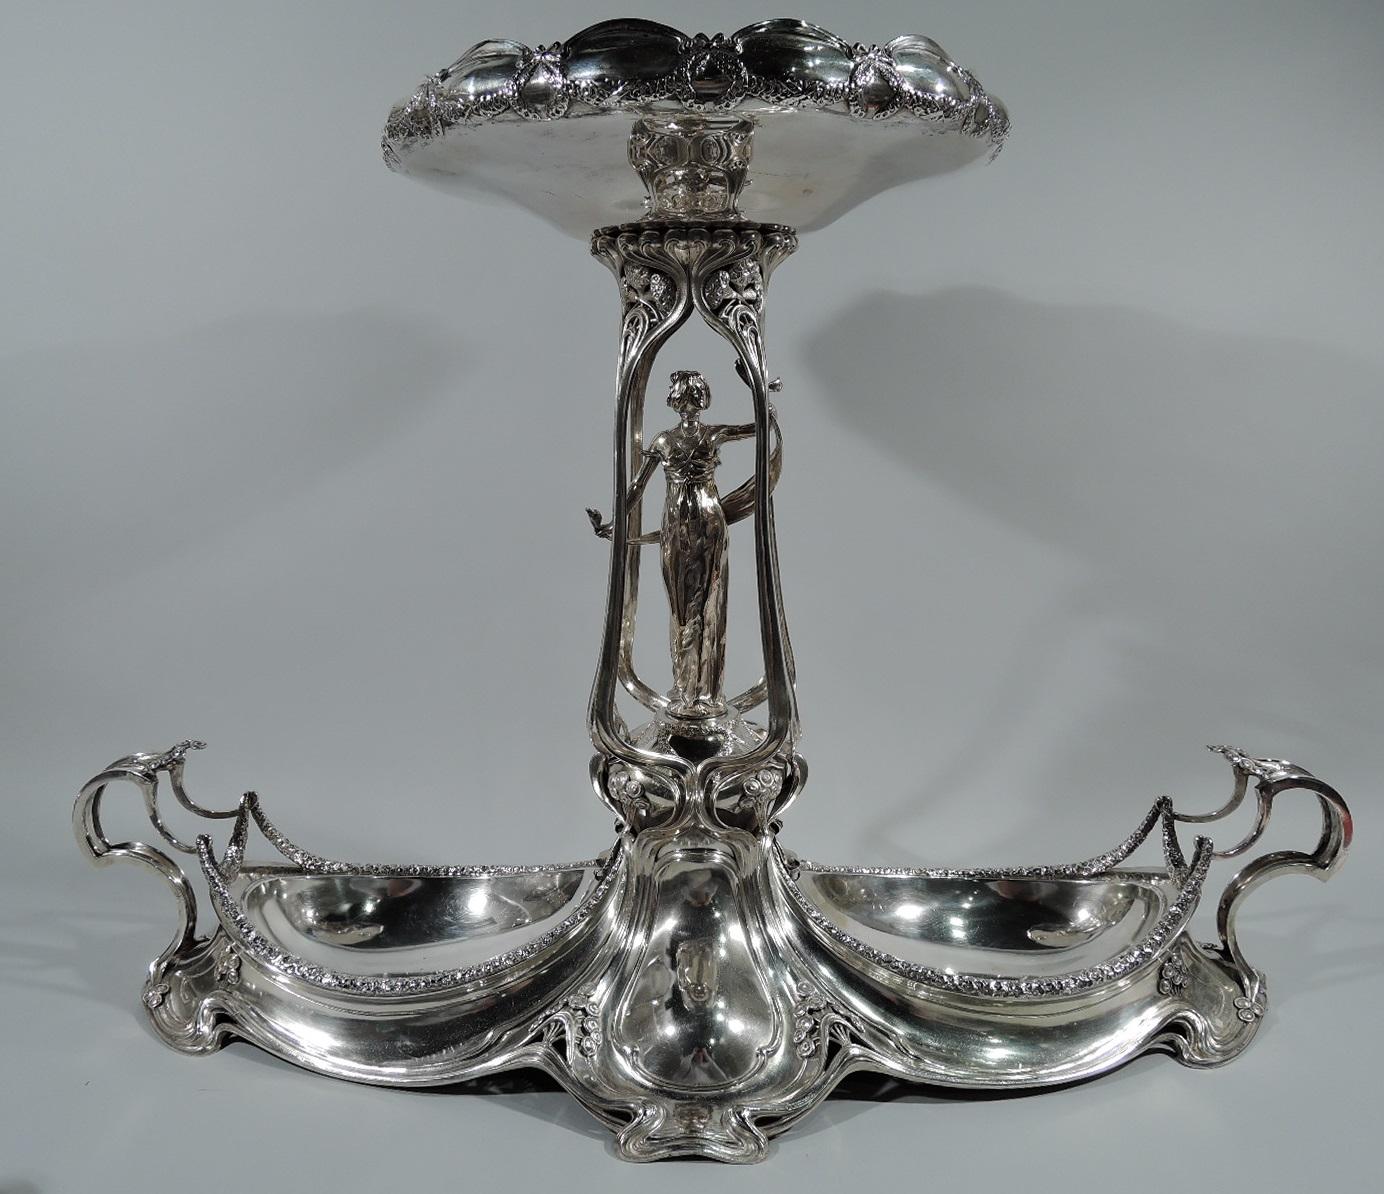 German Art Nouveau 800 silver centerpiece. Made by M. H. Wilkens & Söhne in Germany, circa 1900. Shaped base with ovoid wells. Flying anthropomorphic end handles with pendant garlands. Central open pergola with figure of bare-breasted Classical